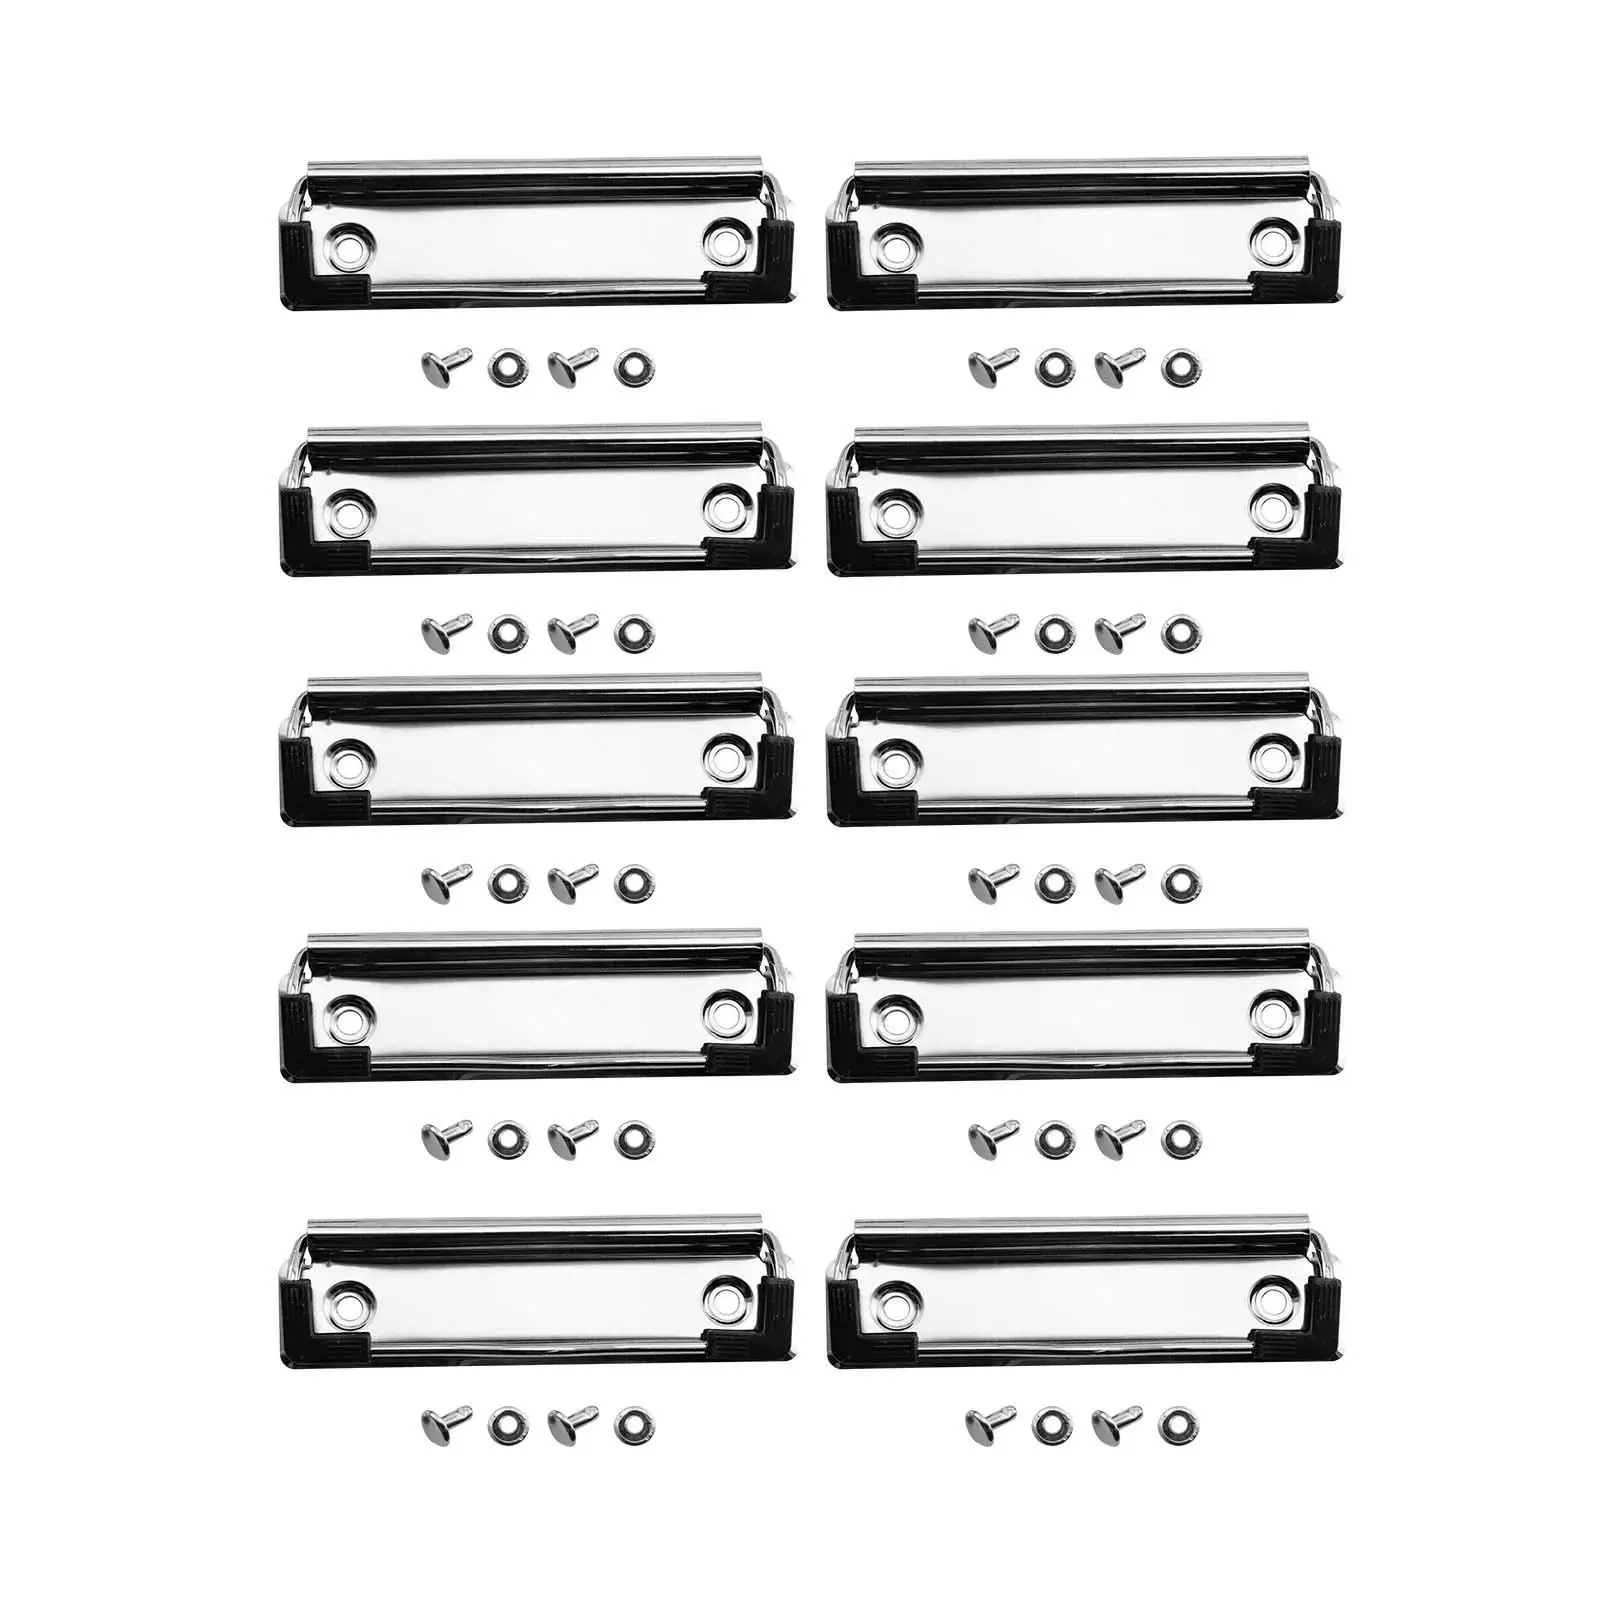 10x Mountable Clipboard Clips with Rubber Grip 10cm Spring Loaded Metal Stationery Plate Holder for Class School Business Office